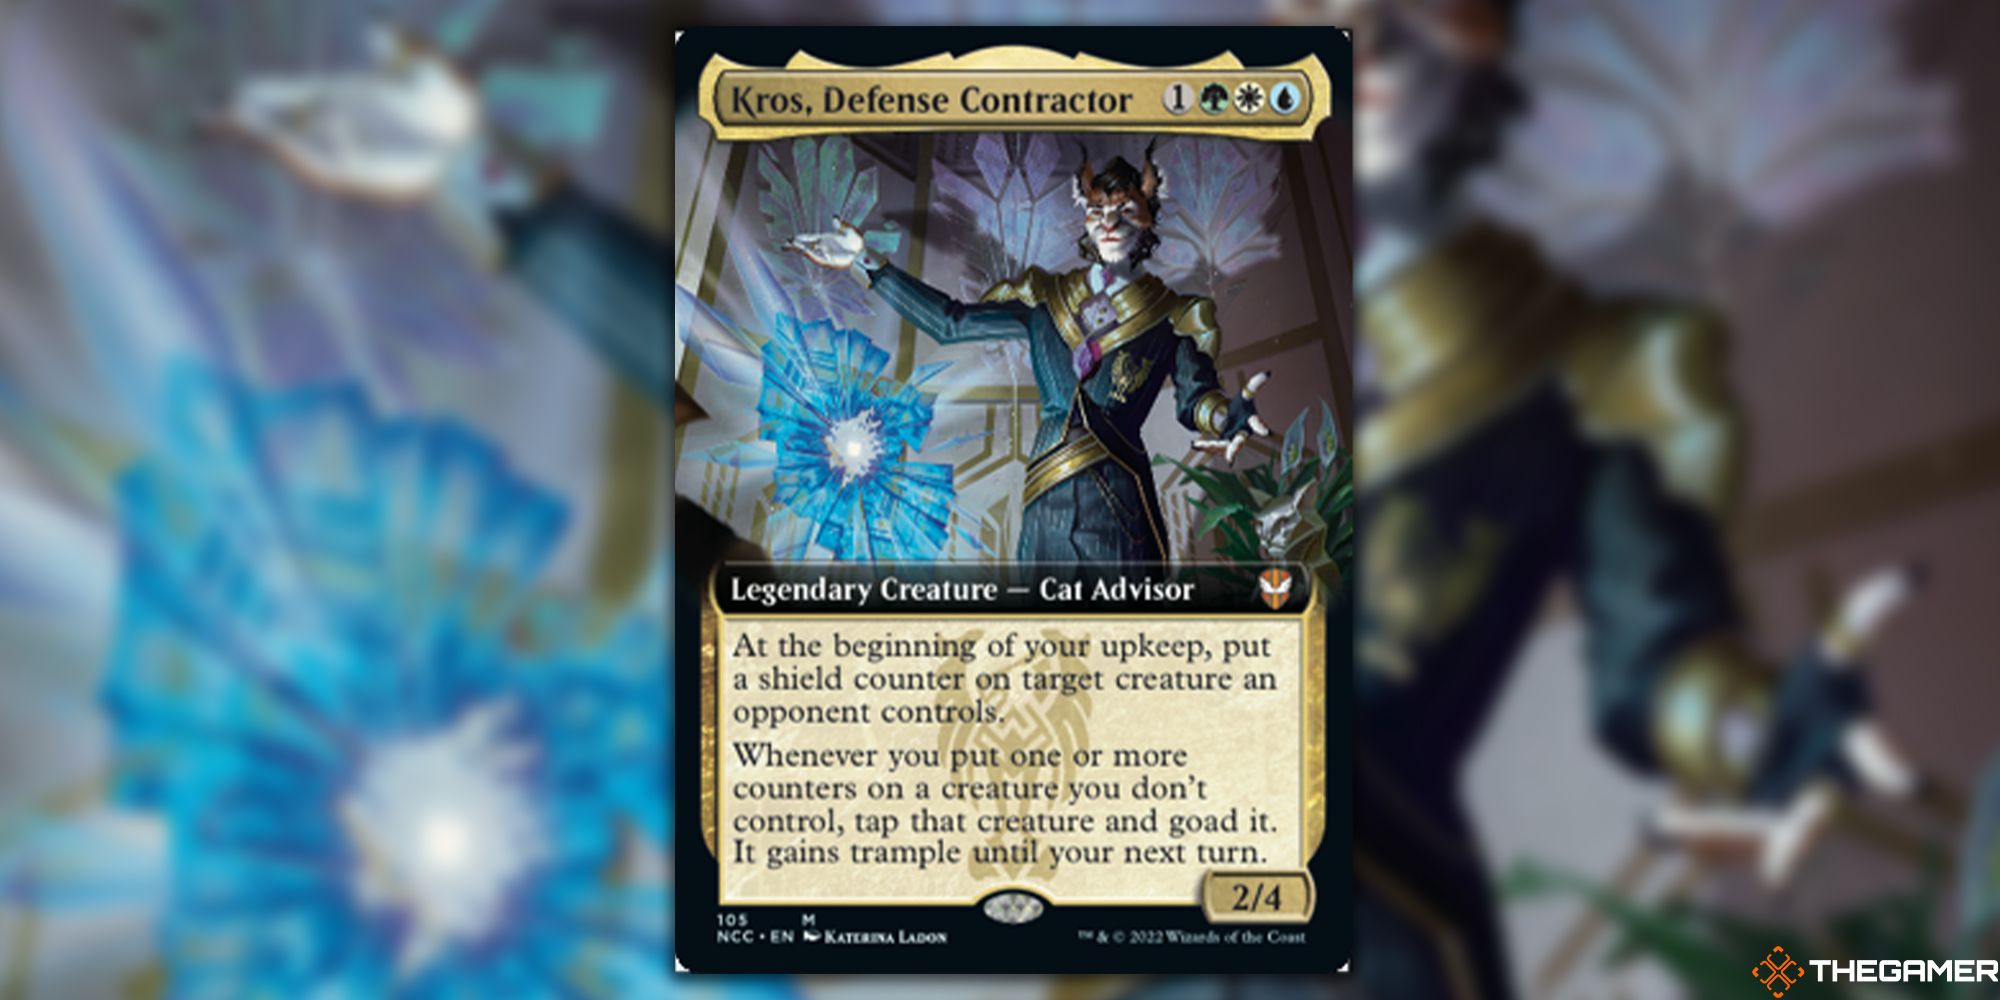 Image of the Kros, Defense Contractor card in Magic: The Gathering, with art by Katerina Ladon